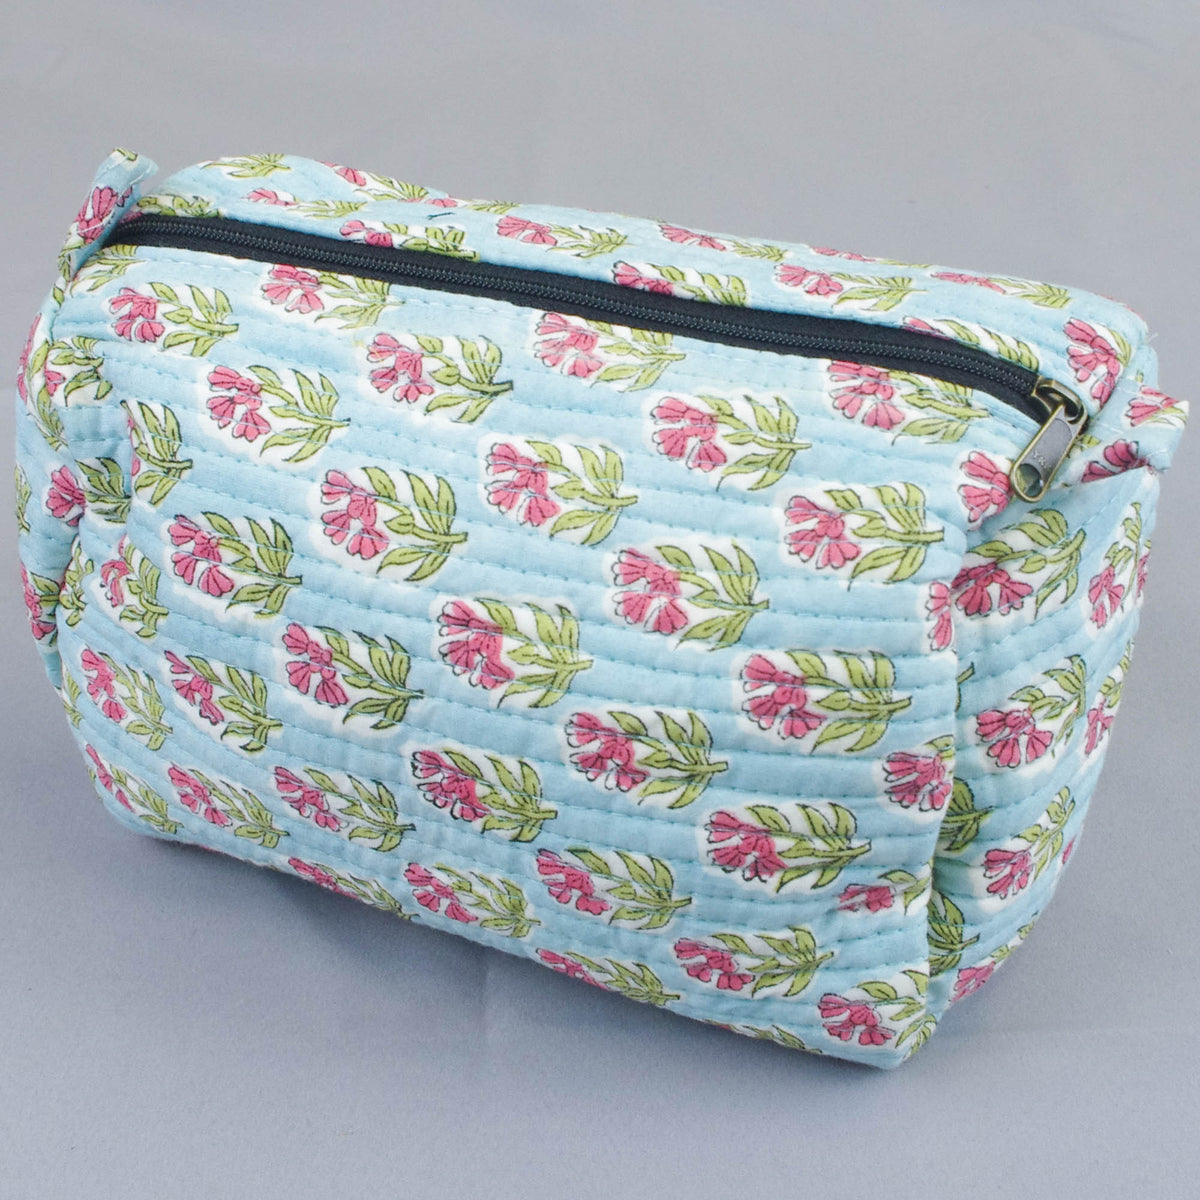 Cotton Velvet Quilted Cosmetic Bag Pouch,Make Up,Block Printed